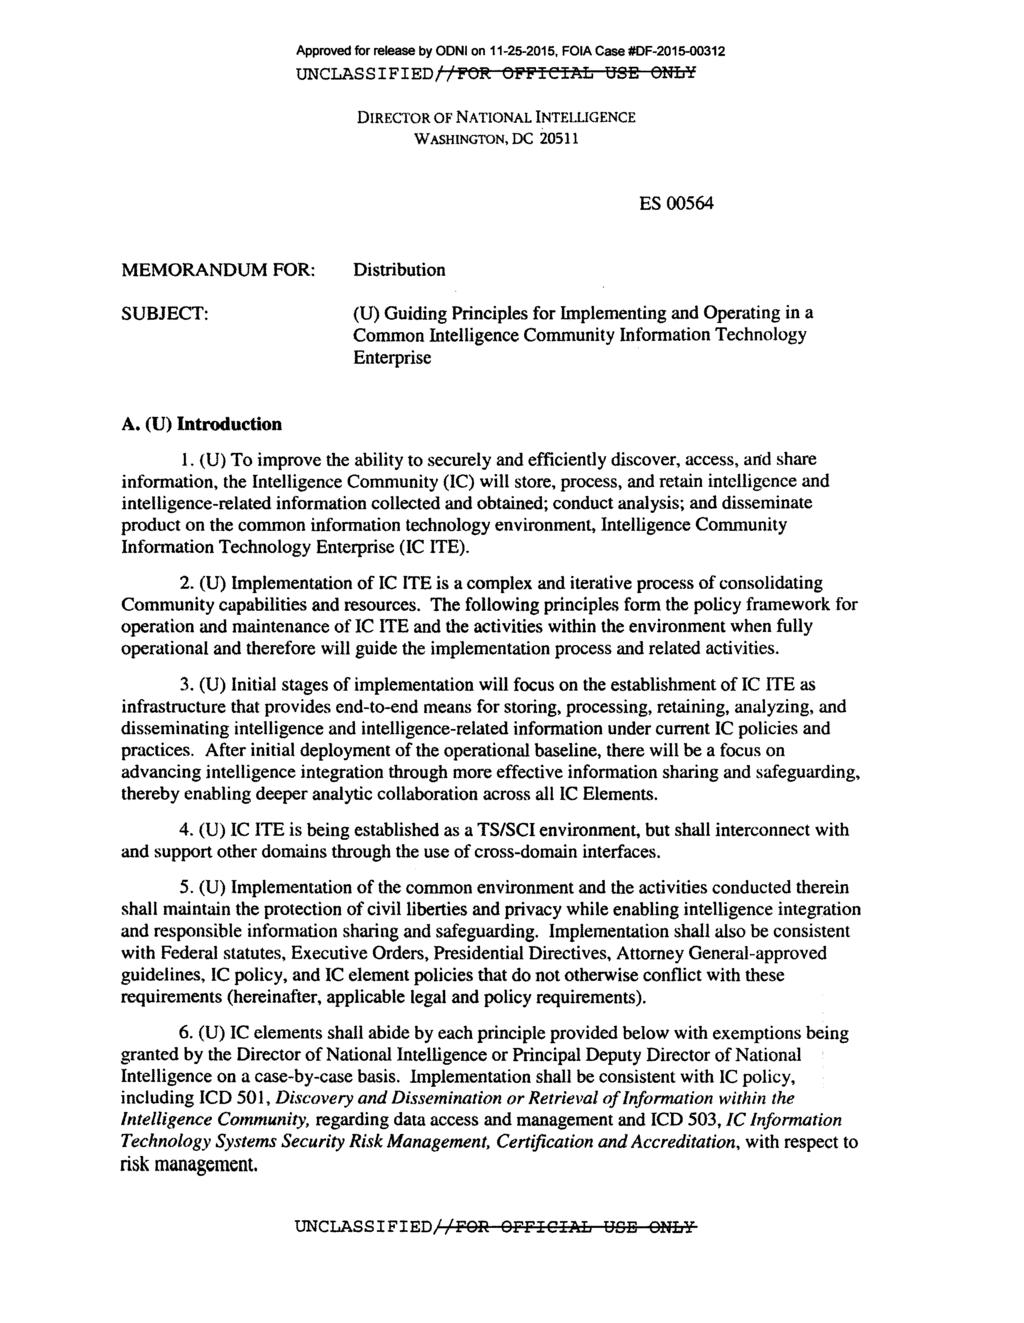 UNCLASSIFIED//li'Oft Oli'li'ICIAL USE ONLY DIREGTOR OF NATIONAL INTELLIGENCE WASHINGTON, DC 20511 ES 00564 MEMORANDUM FOR: SUBJECT: Distribution (U) Guiding Principles for Implementing and Operating